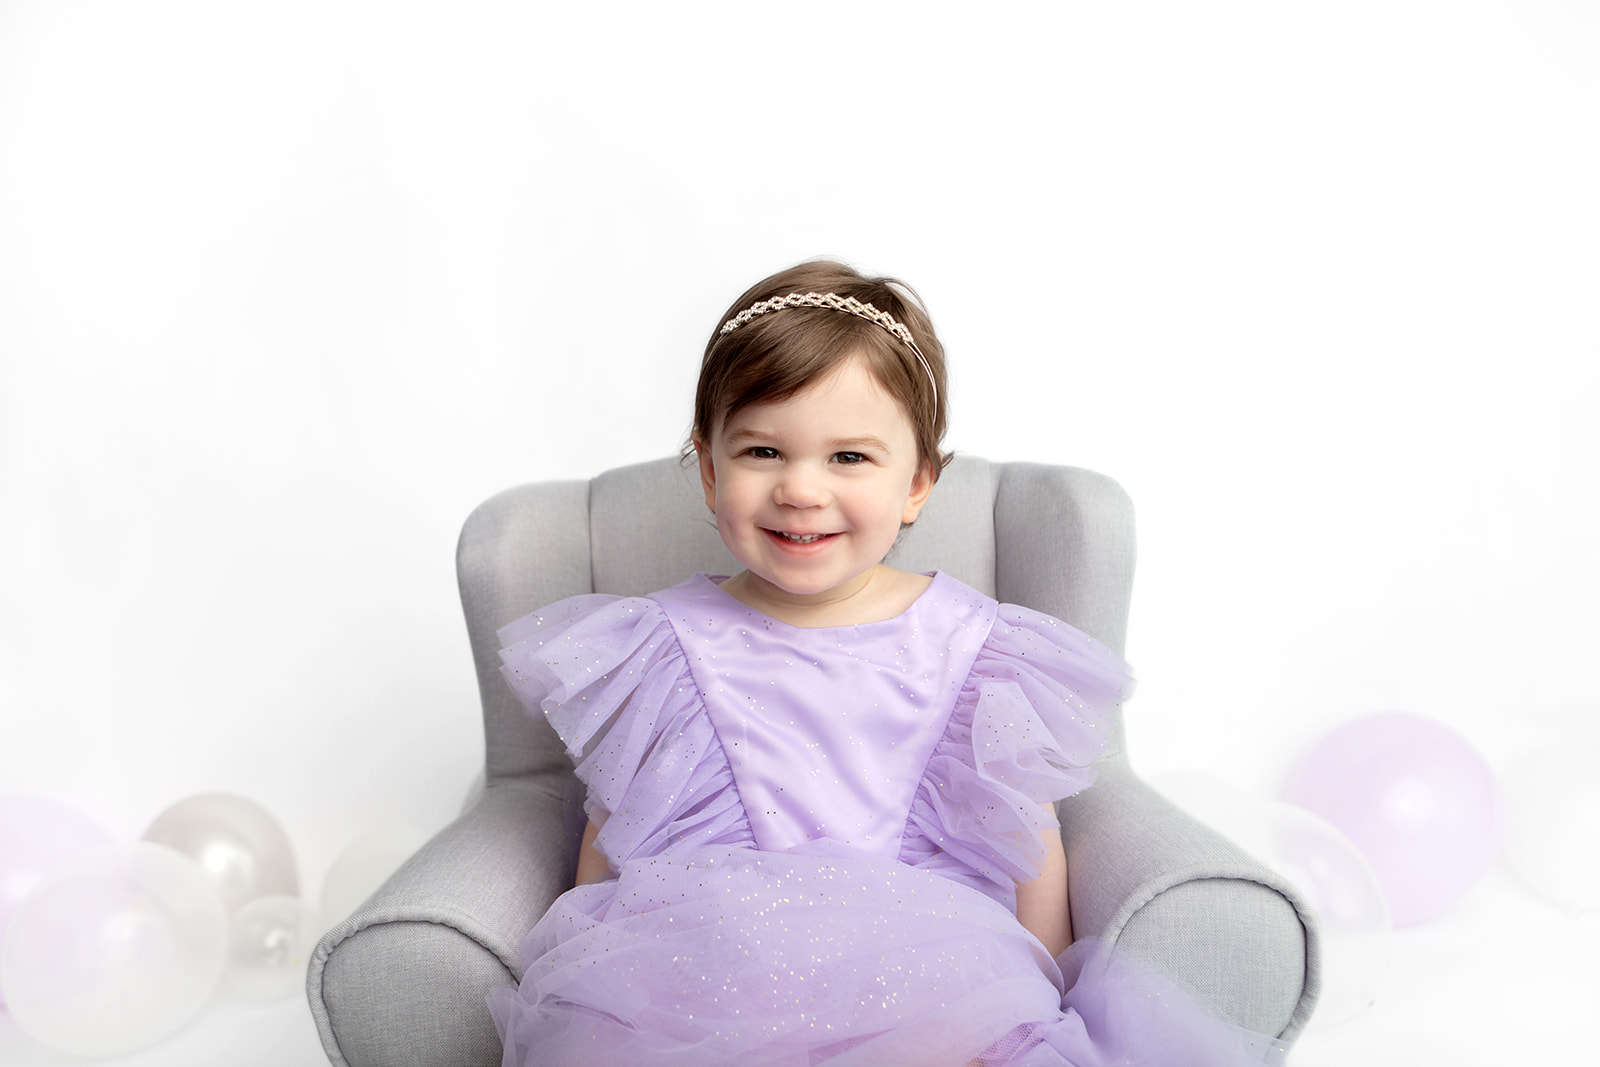 A two year-old girl celebrates her birthday with a milestone portrait session captured by Karen Kahn, of Looking Up Photography. The smiling girl wears a simple headband, and a lavender dress reminiscent of Molly Ringwald in Sixteen Candles. Lavender, silver, and translucent balloons pepper the white studio floor.